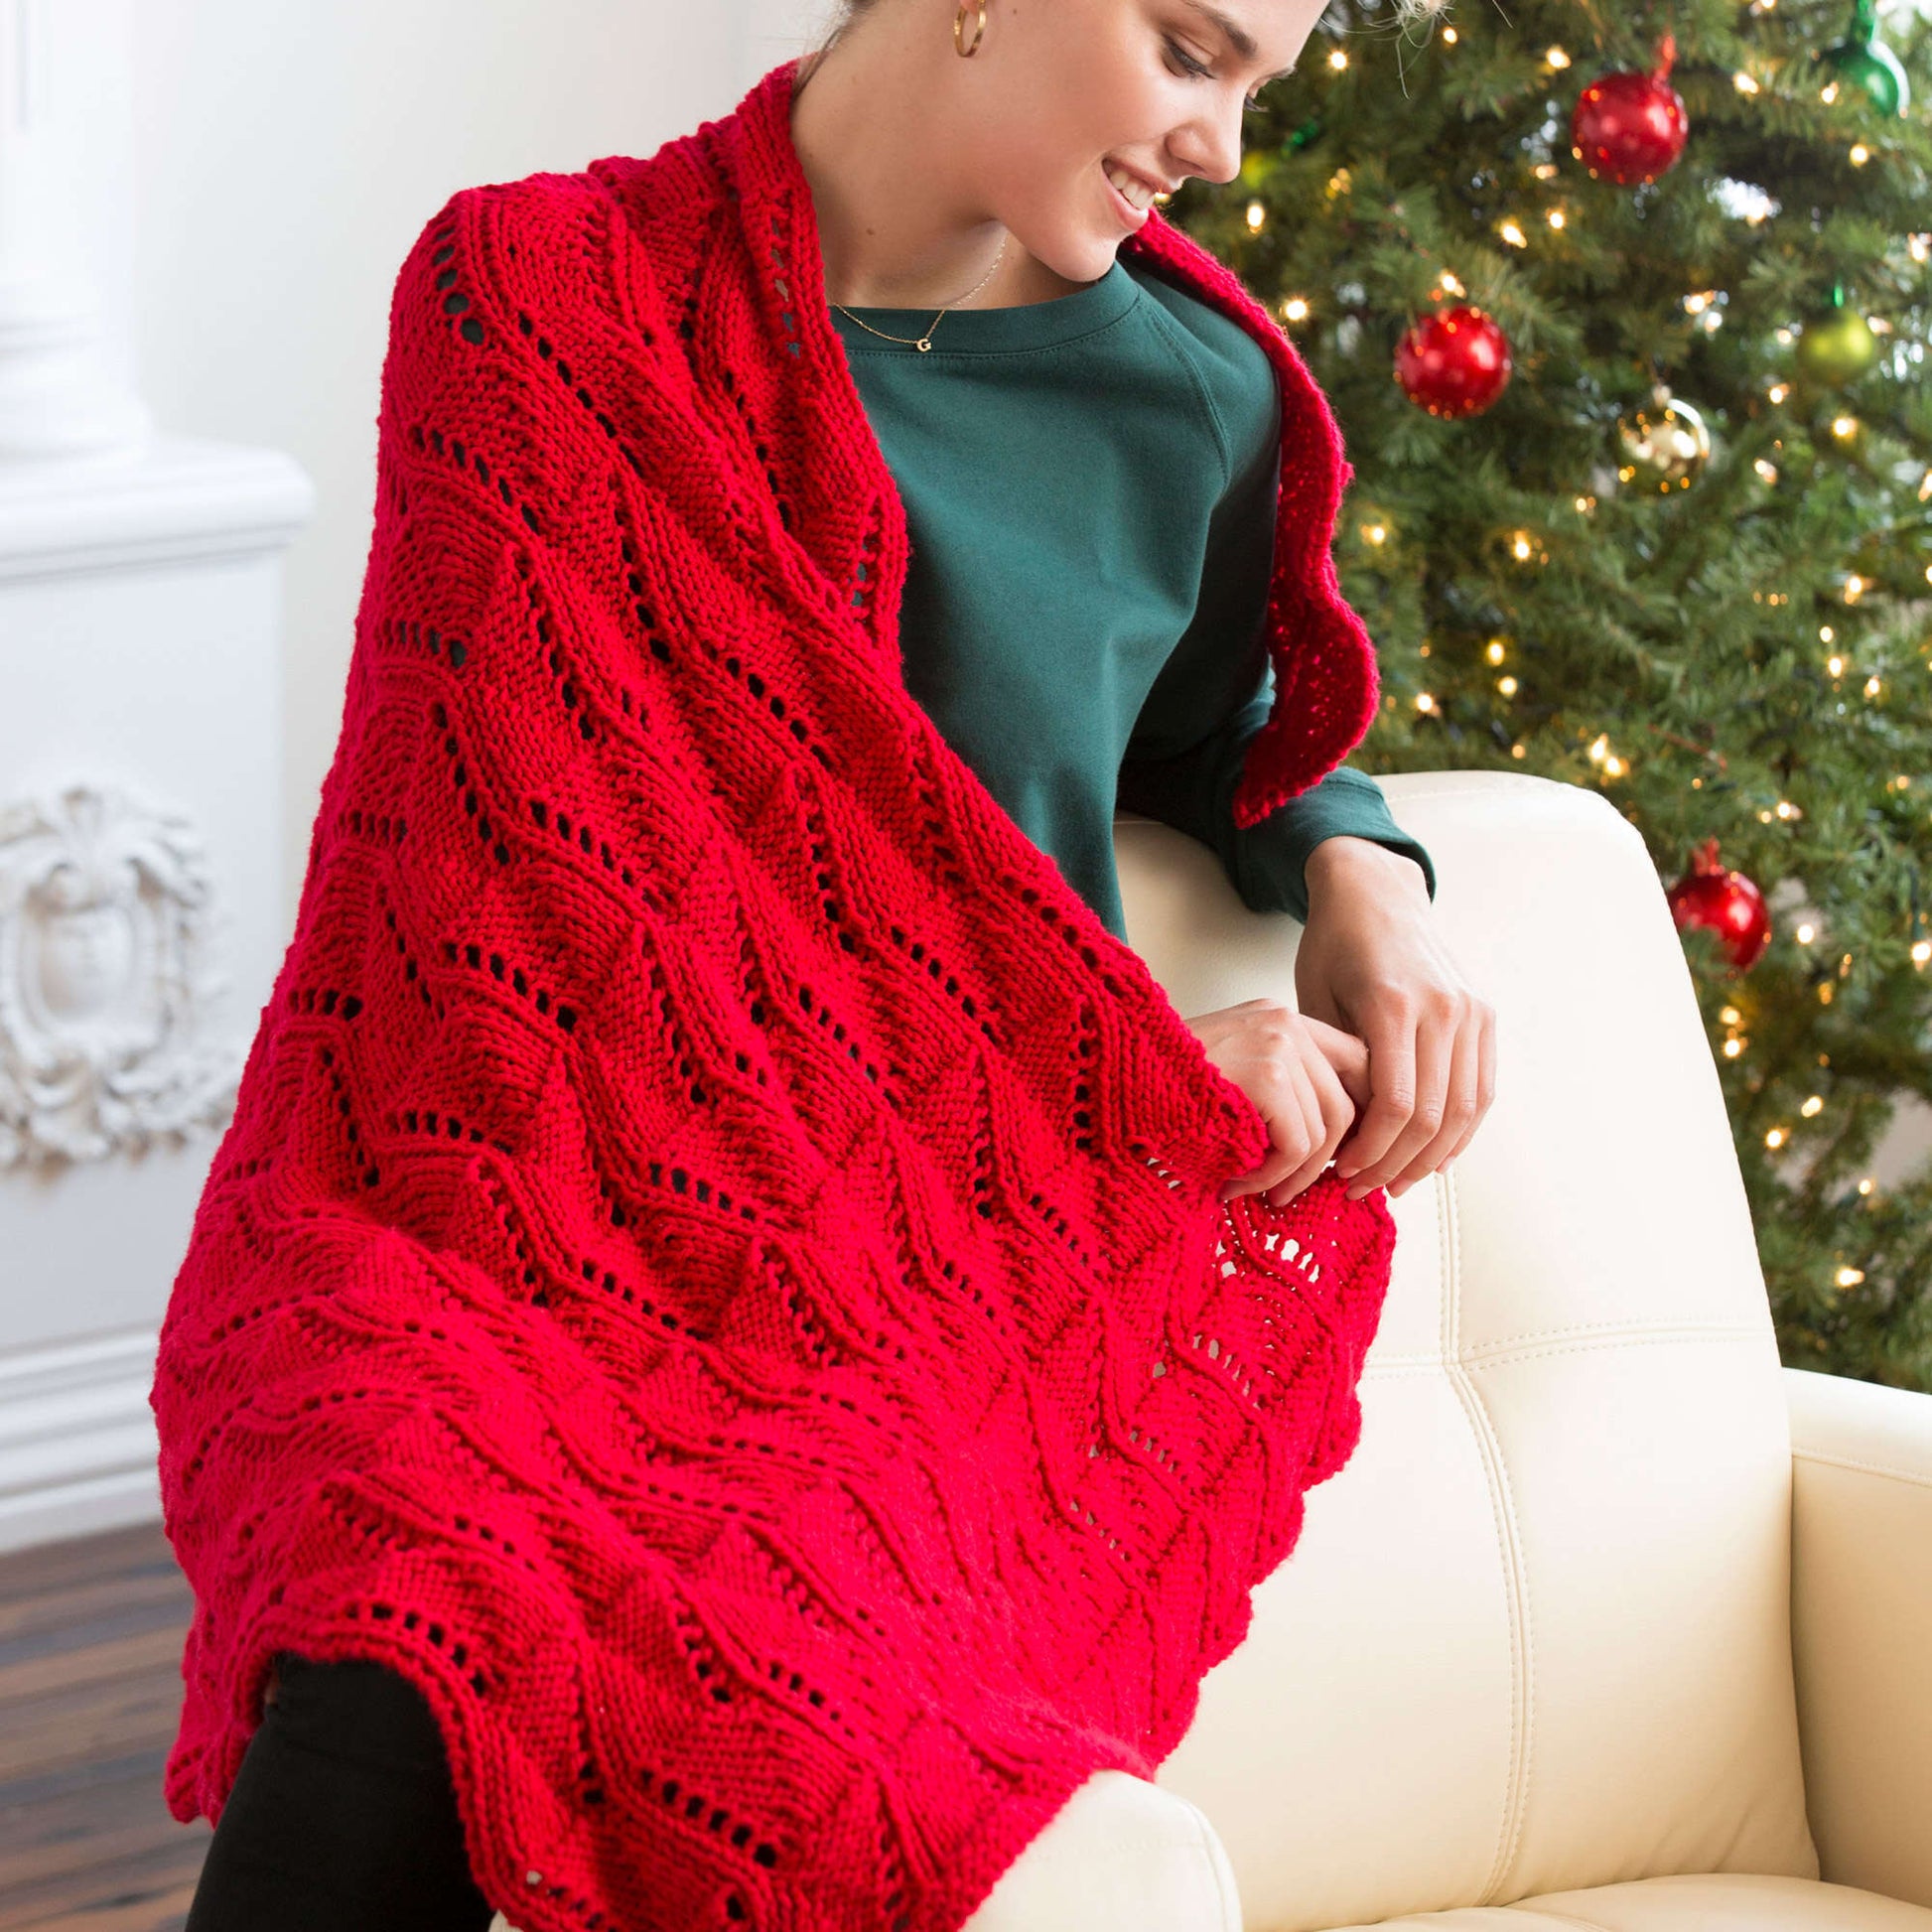 Free Red Heart Knit Reversible Wave Throw Pattern